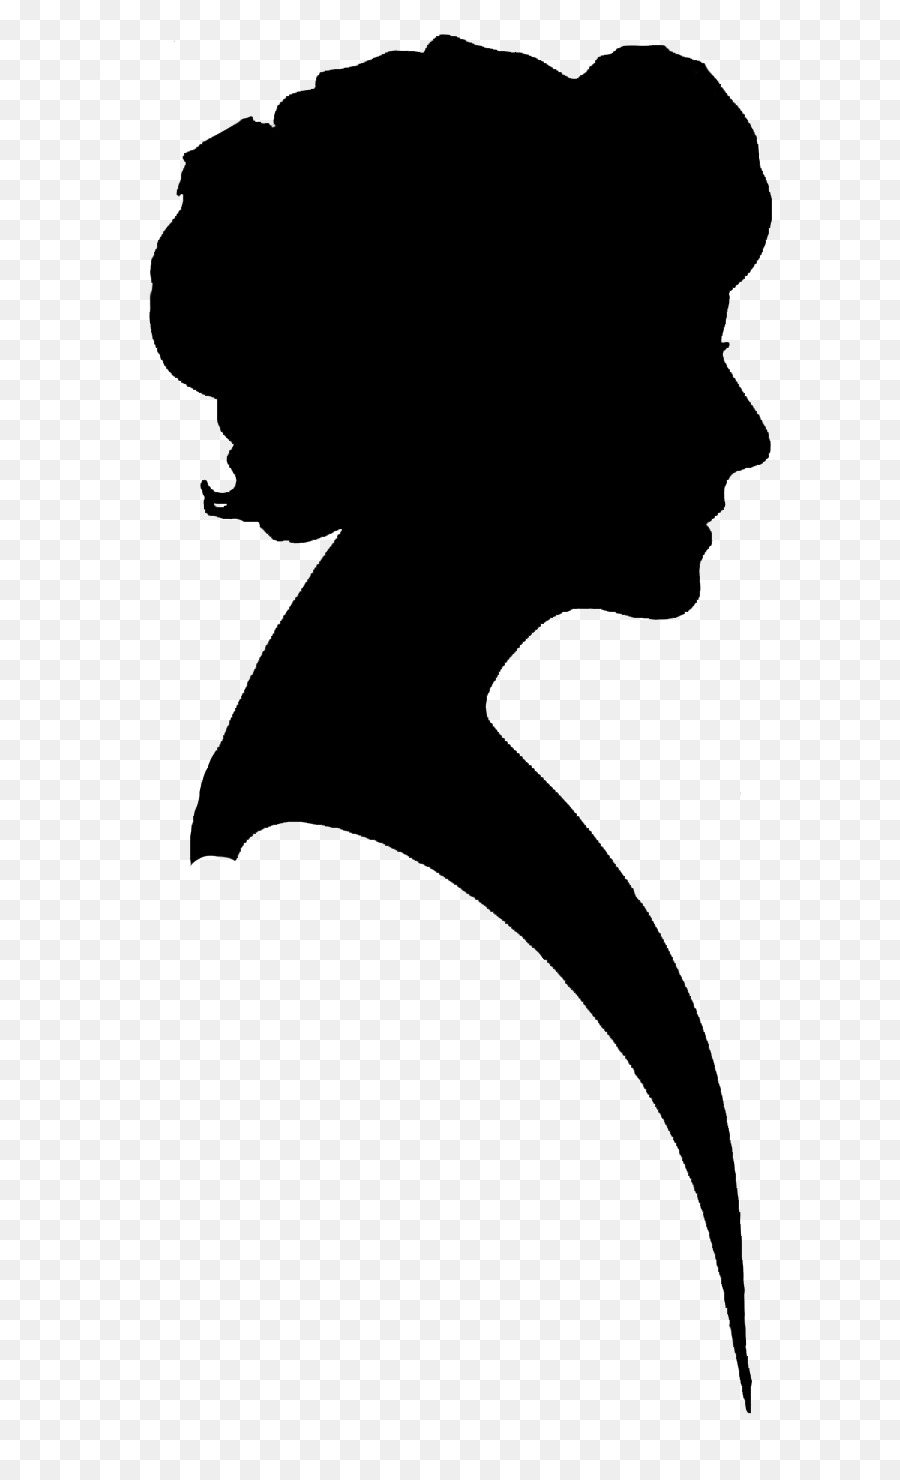 Clip art Silhouette Image Little Women Portable Network Graphics - hedgehog silhouette png silhouette drawing png download - 712*1479 - Free Transparent Silhouette png Download.